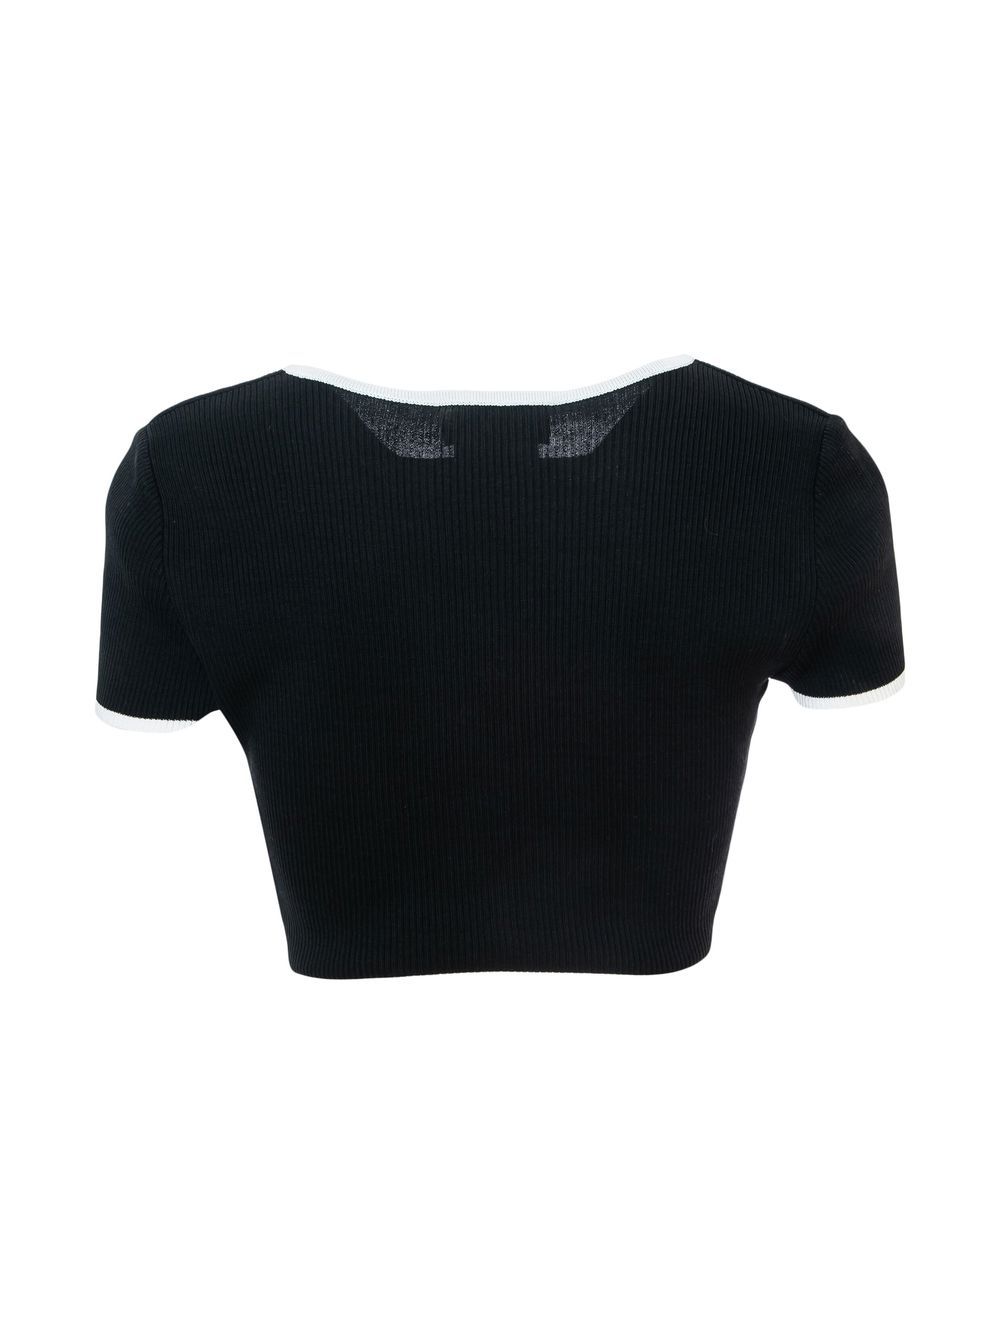 CHANEL Pre-Owned 1995 cropped top - Zwart